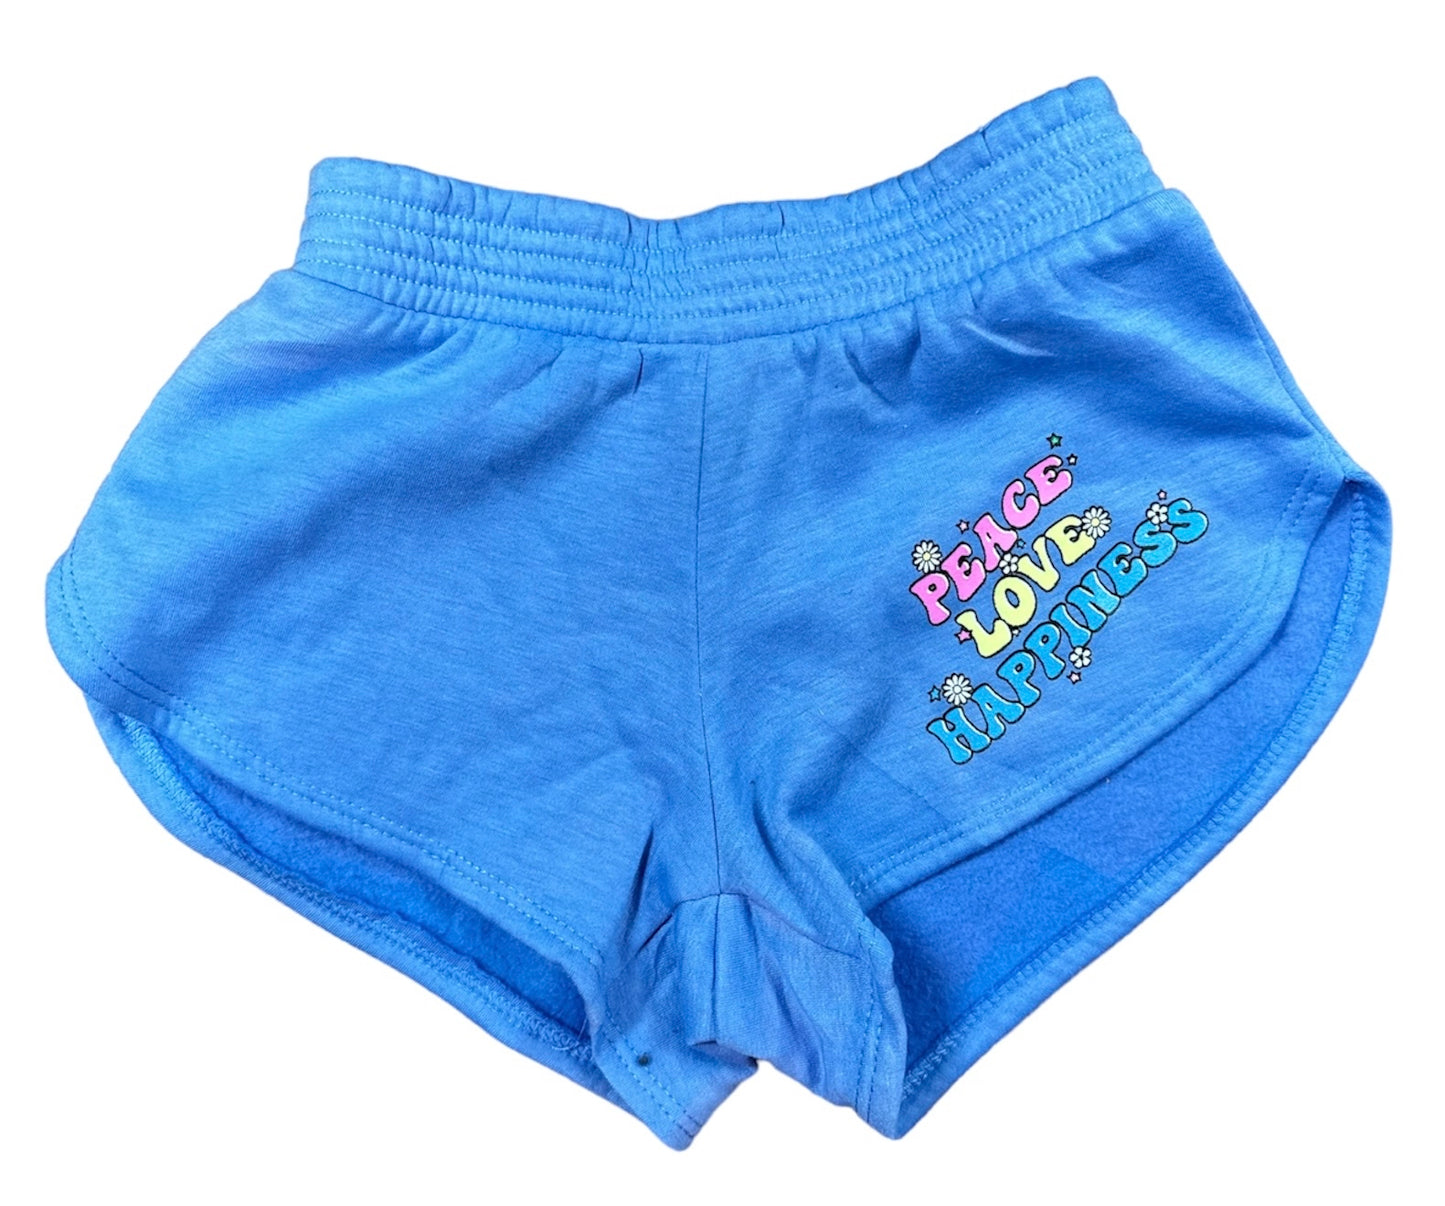 Firehouse Peace Love Happiness Shorts